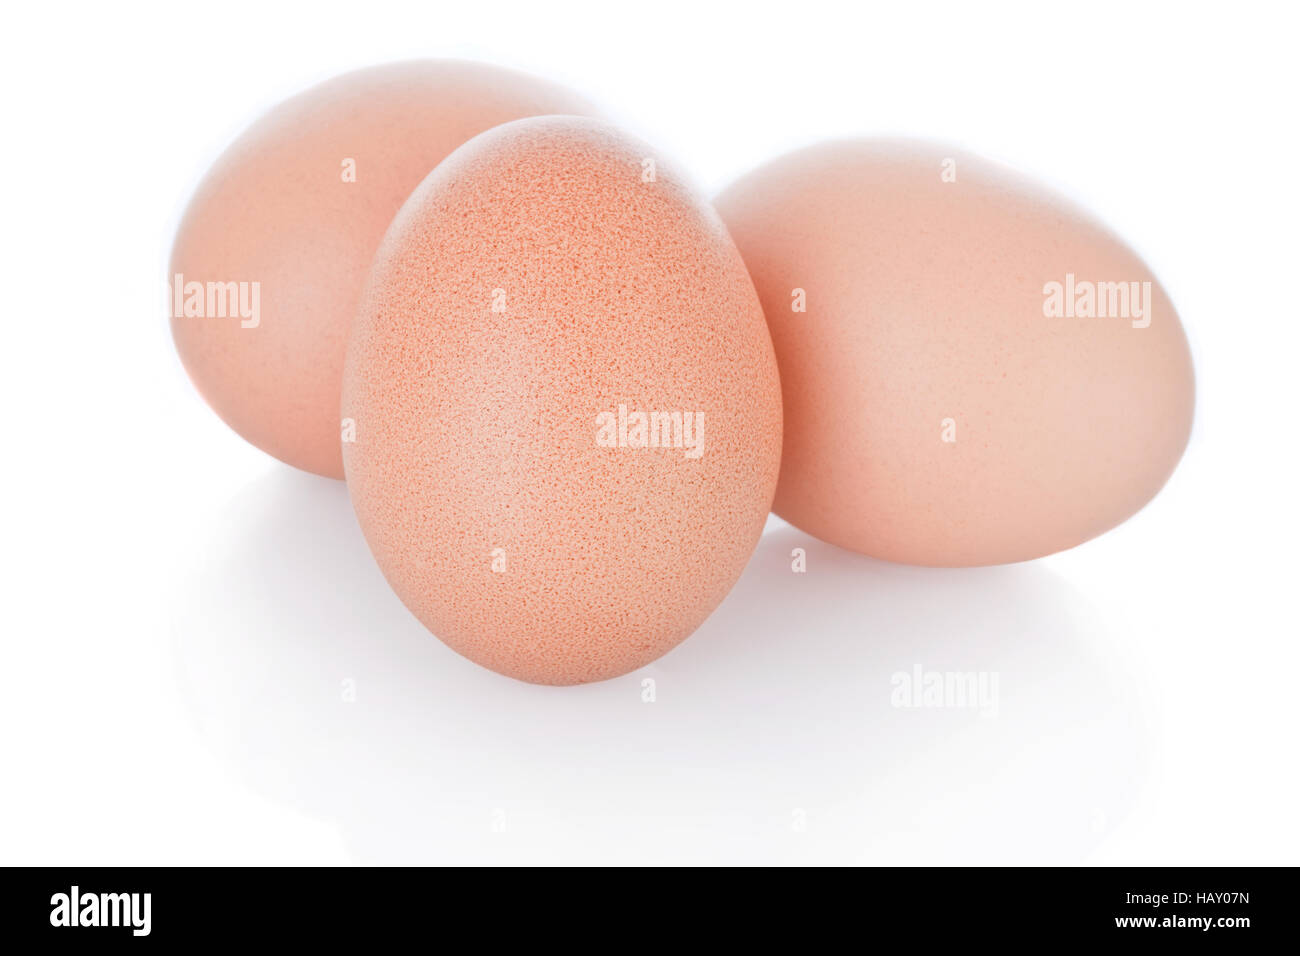 Three brown chicken eggs isolated on white background Stock Photo